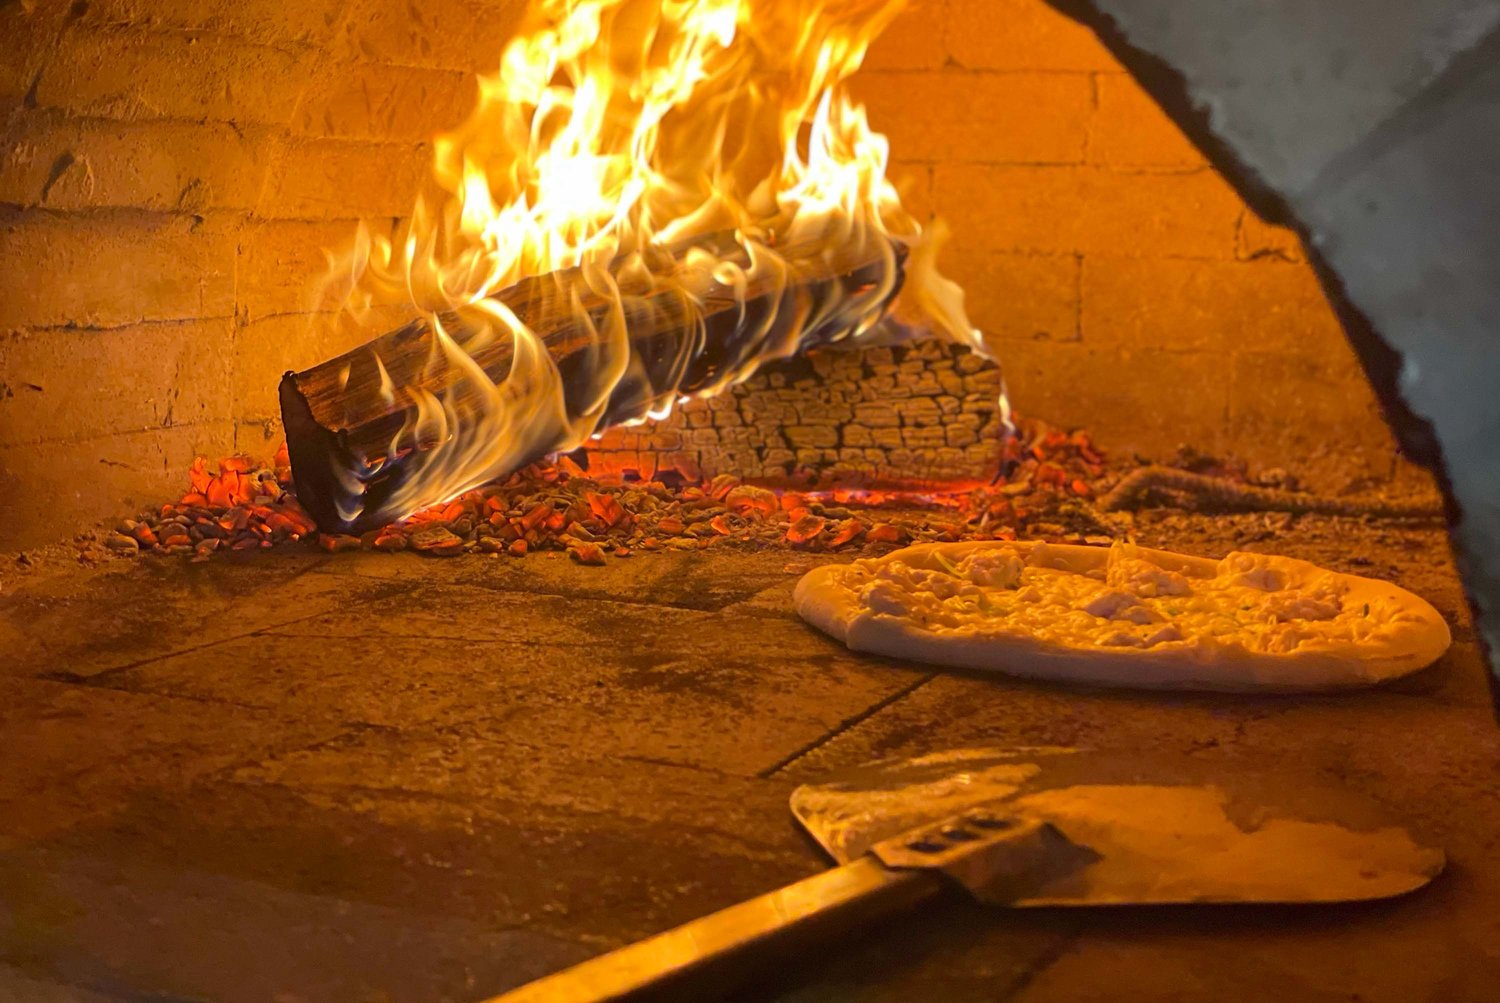 Brick-oven pizza is a staple of the new Valley digs